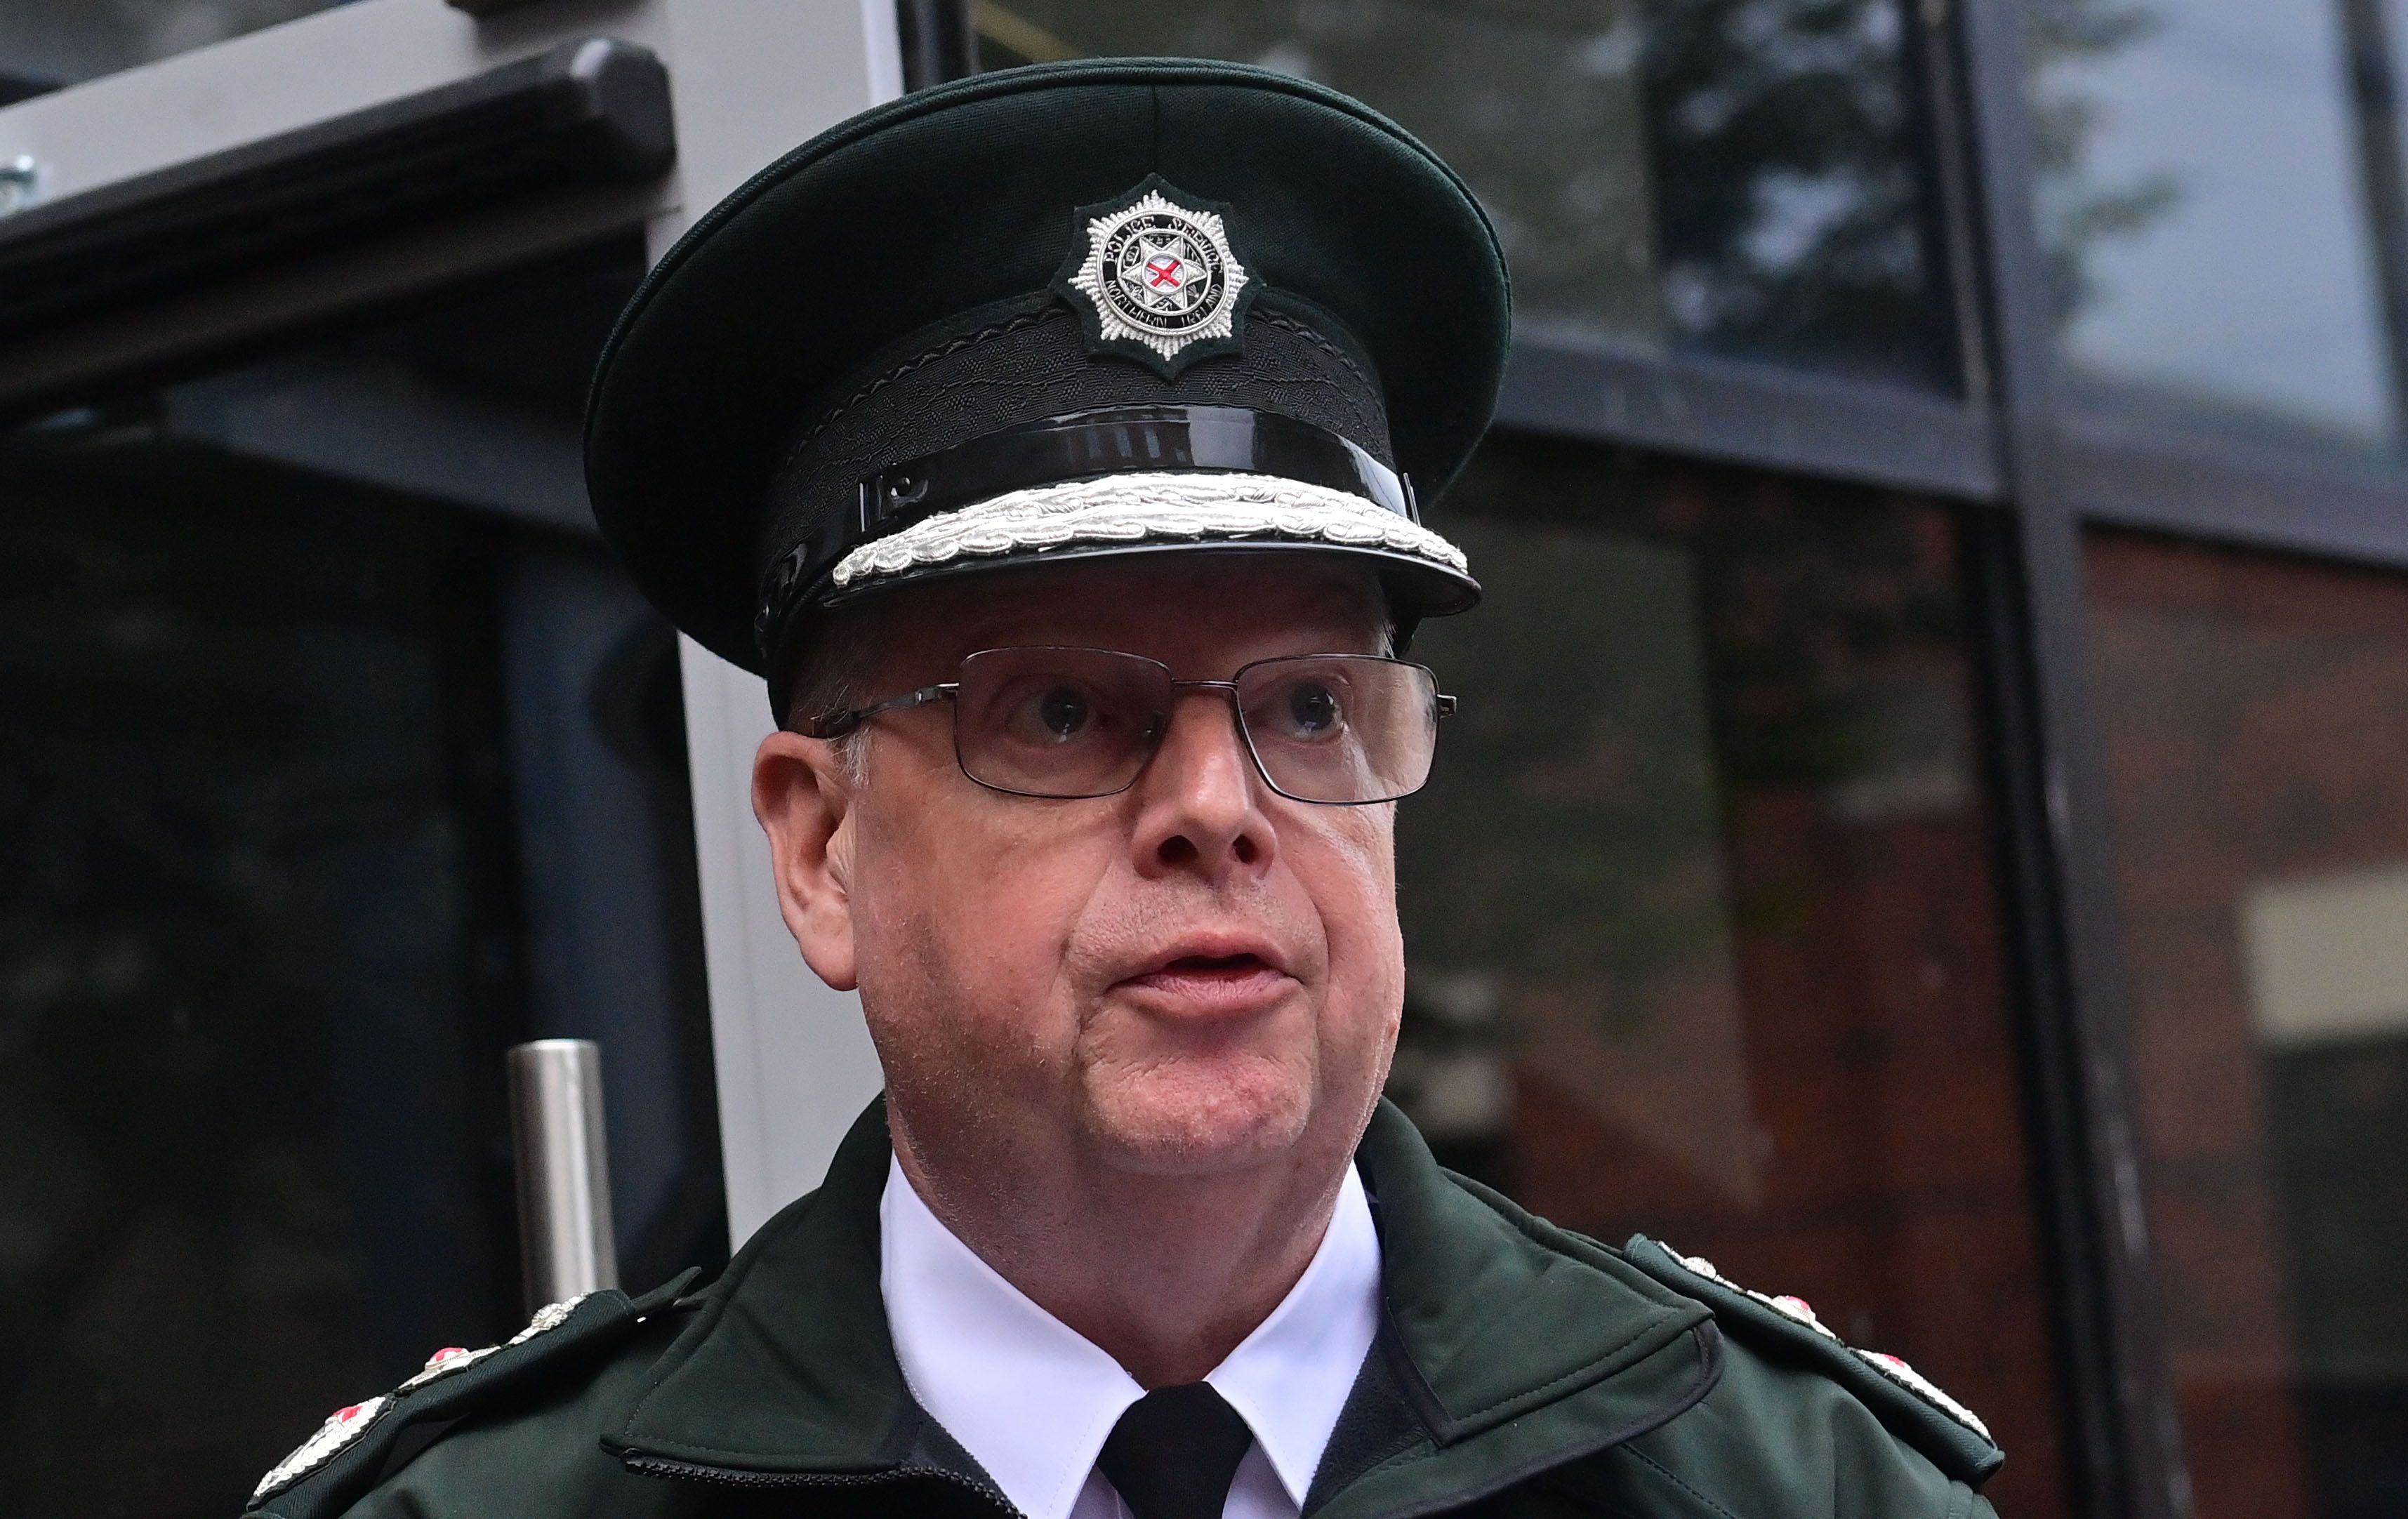 RESIGNED: Chief Constable Simon Byrne has quit